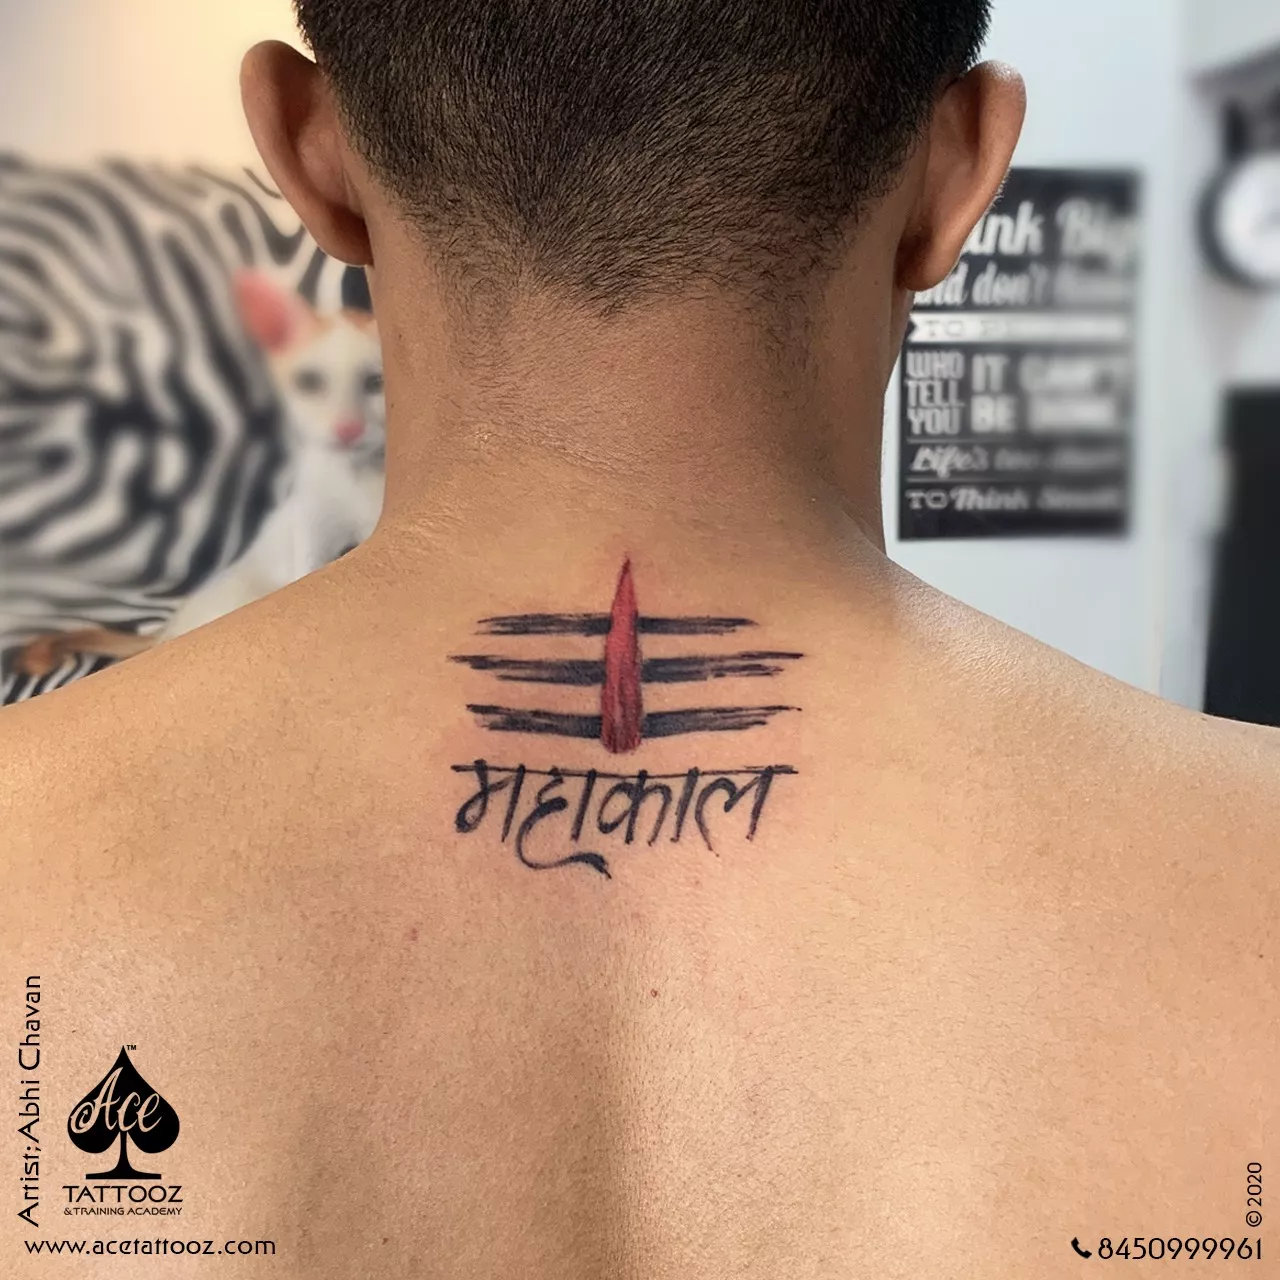 Buy Famous Shiv Ji Angry And MahaKaal Tattoo Combo Waterproof Men and Women  Temporary body Body Tattoo Online @ ₹249 from ShopClues